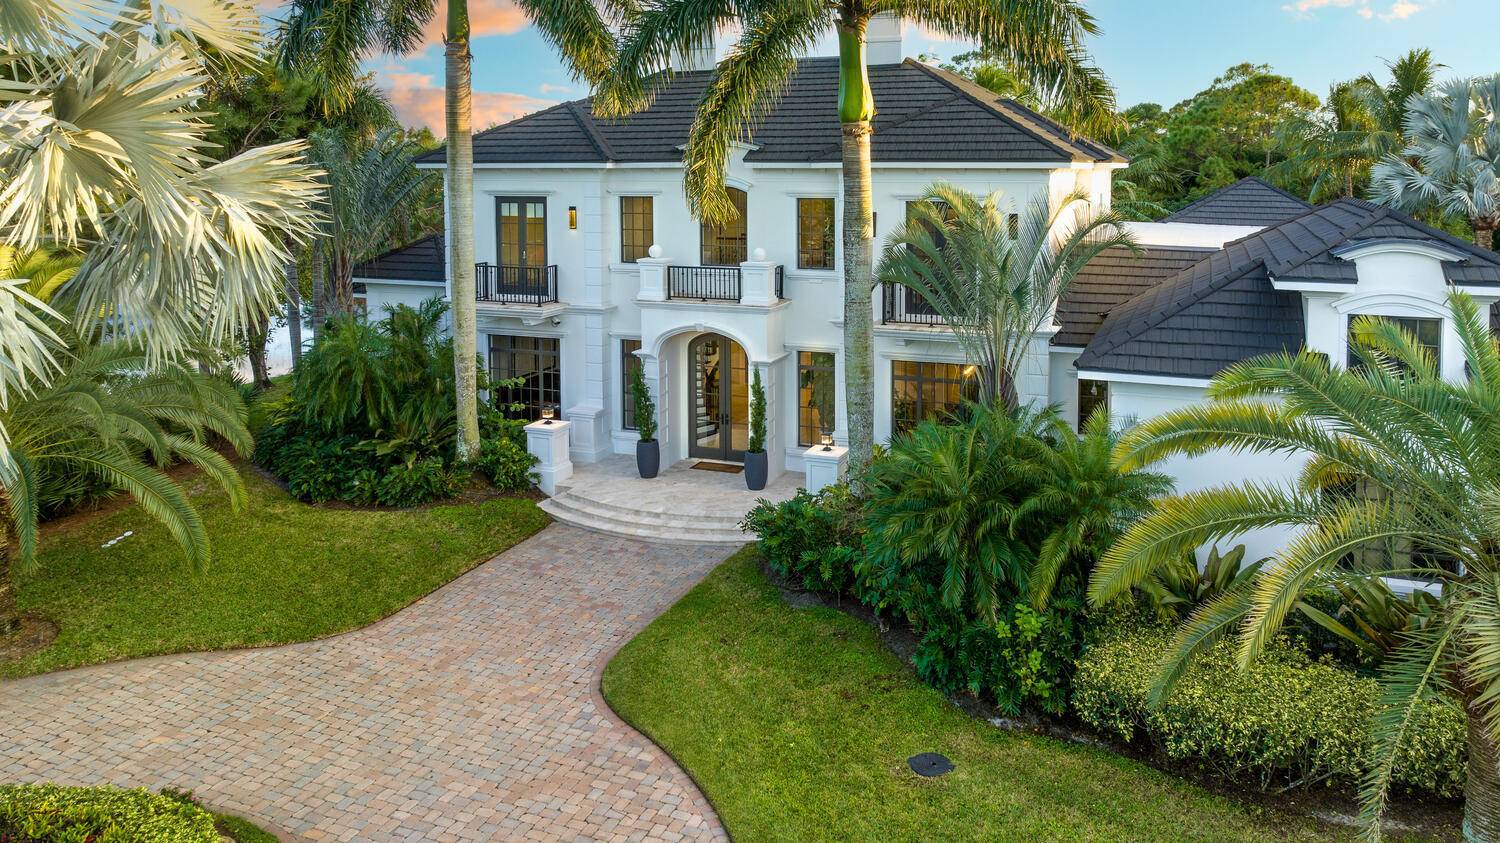 Enjoy the true essence of Florida Living in this exclusive, custom grand estate in the highly sought after gated community of Hidden Bridge.